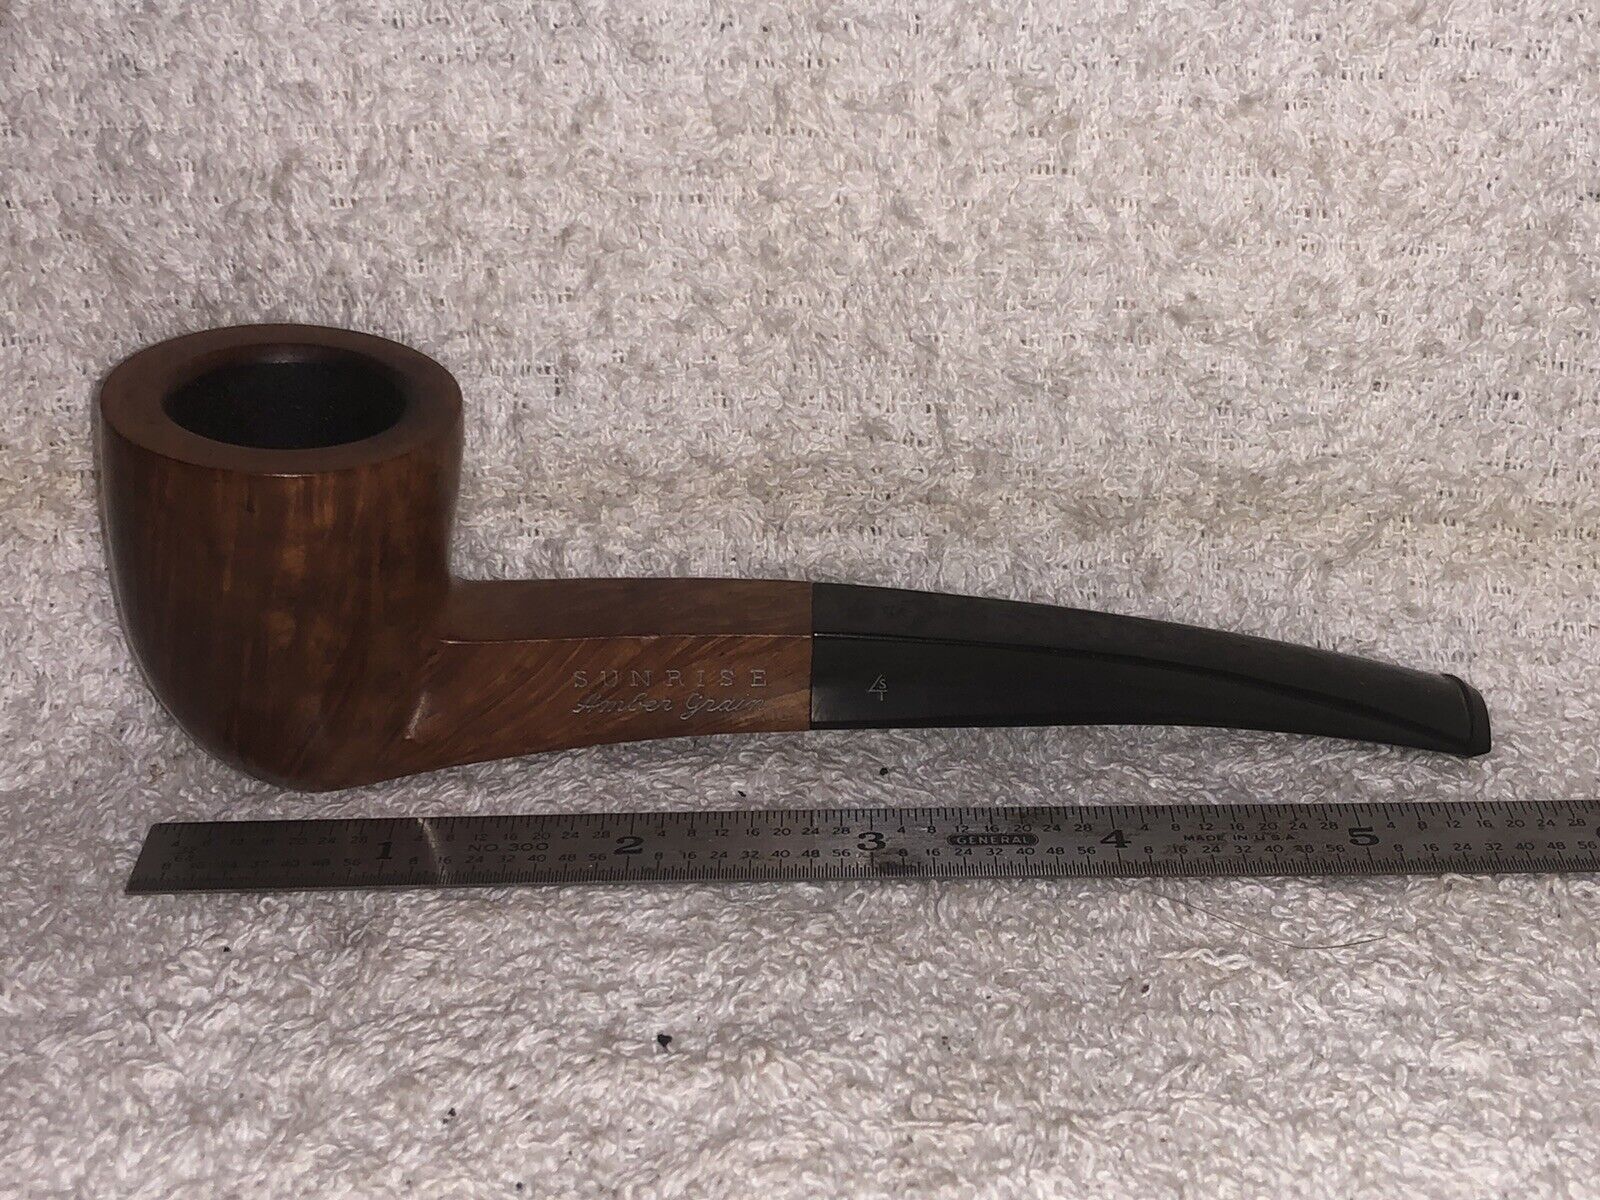 1993), SunRise Amber Grain by Comoy￼, Tobacco Smoking Pipe, Estate, 00340